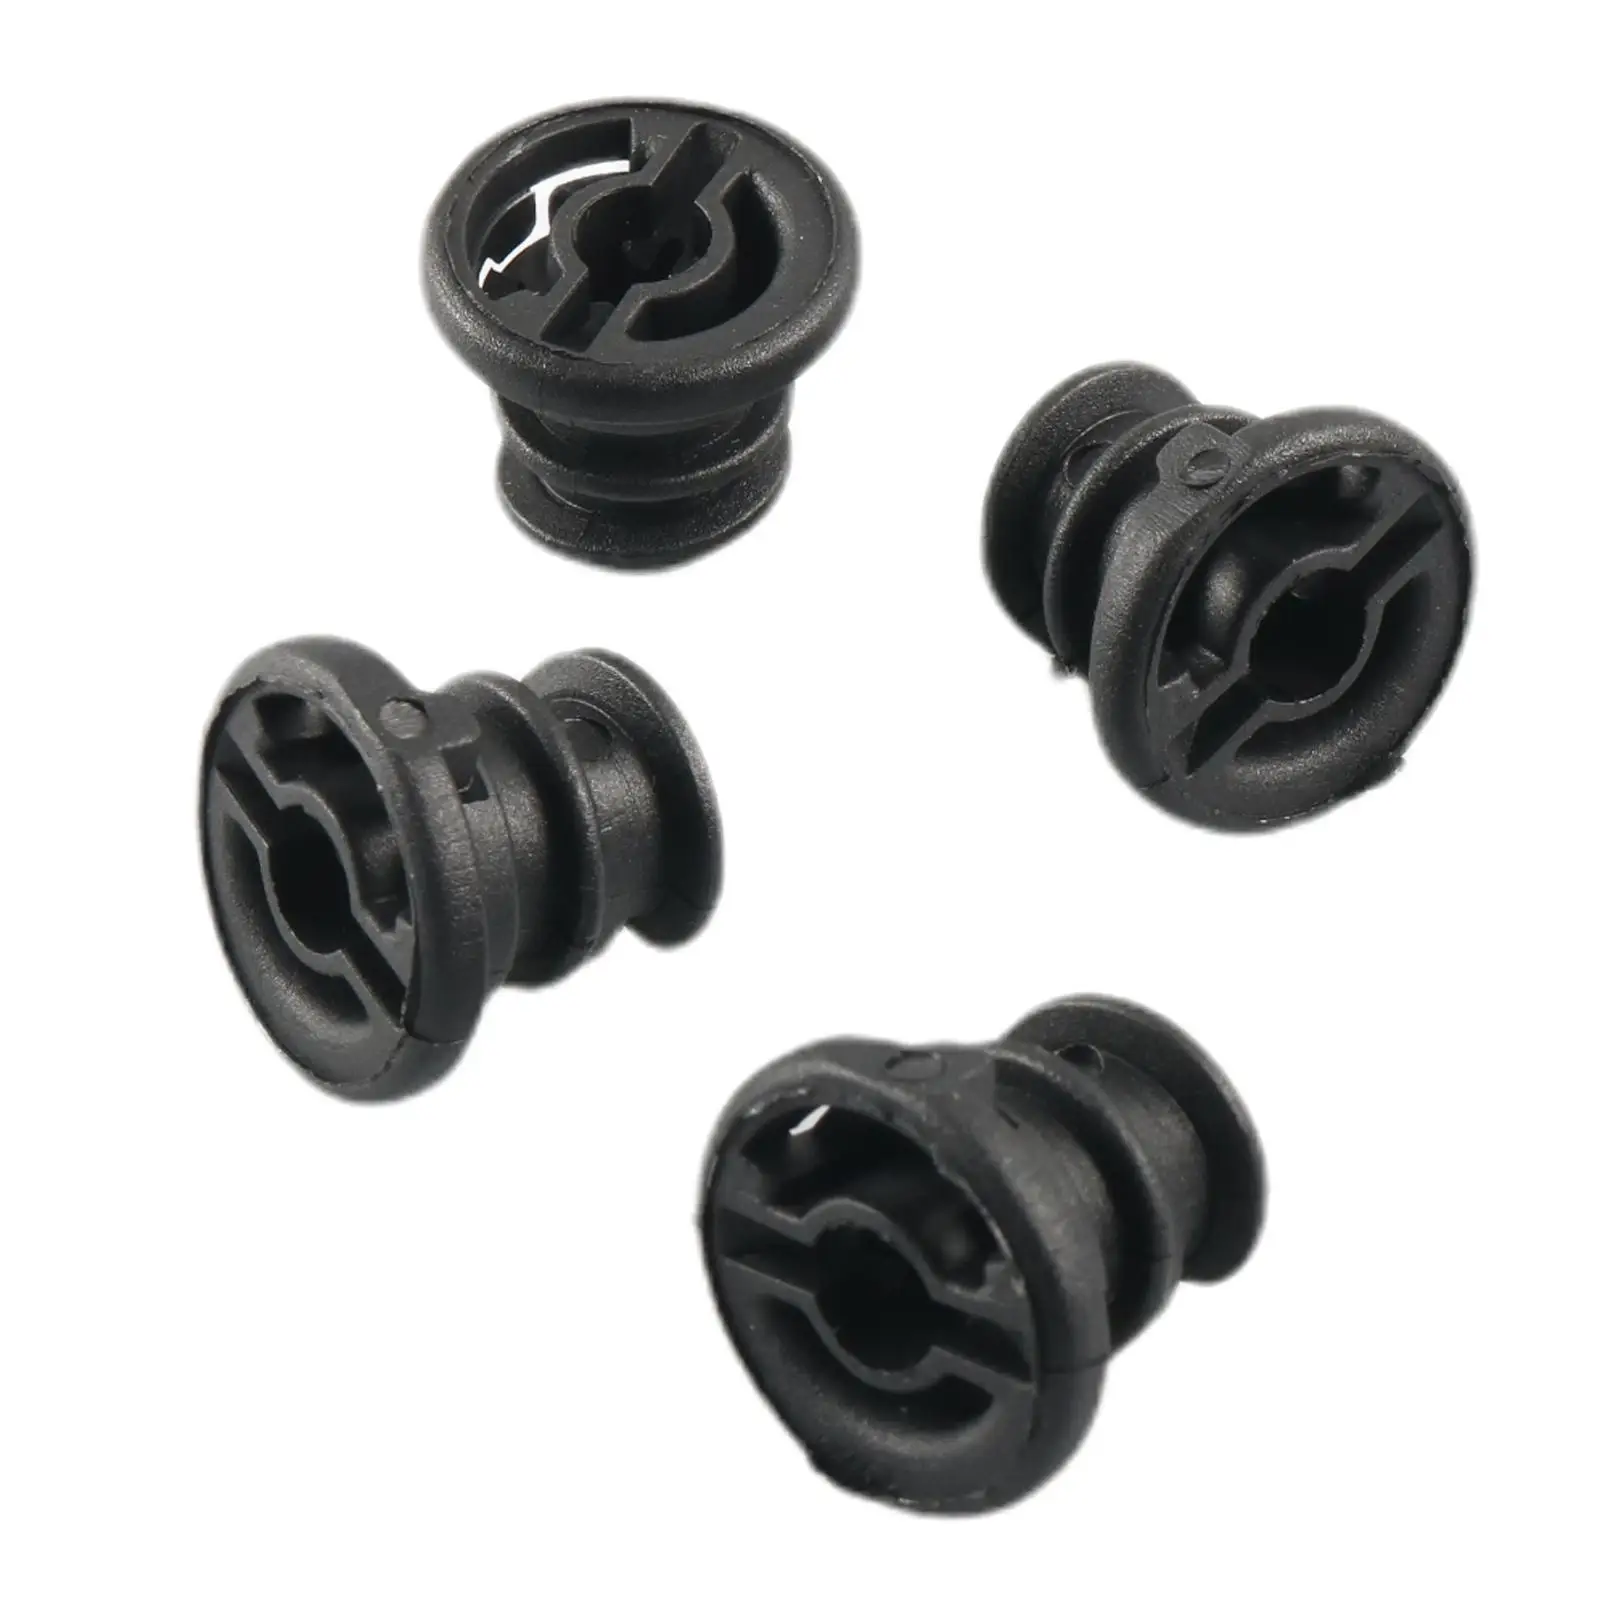 2x4x Oil Pan Oil Drain Screw 06L103801 with 4Pcs Gasket O Rings Sump Plug for A3